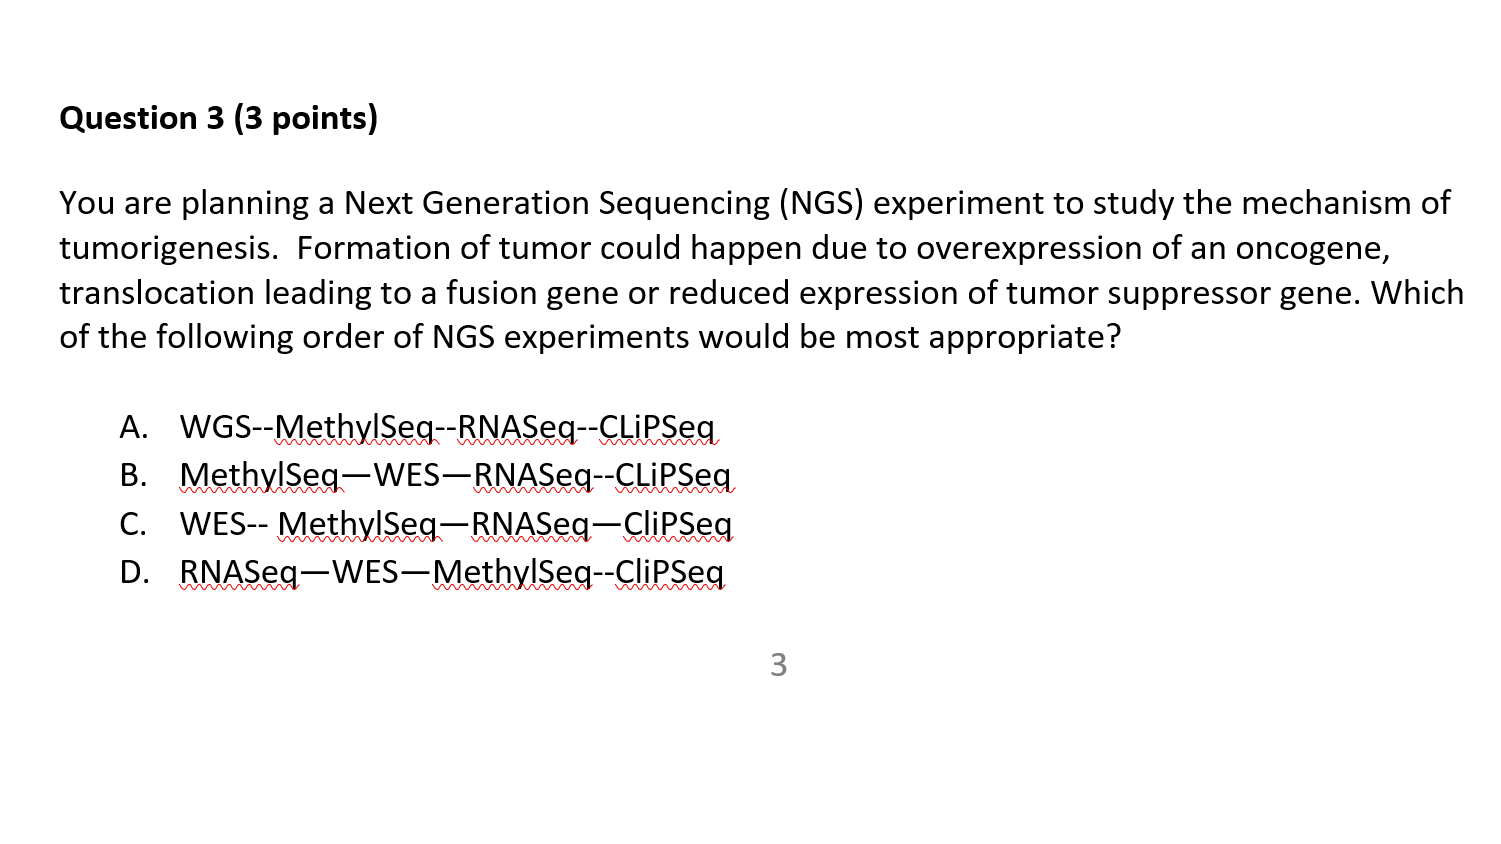 You are planning a Next Generation Sequencing (NGS) experiment to study the mechanism of tumorigenesis. Formation of tumor co